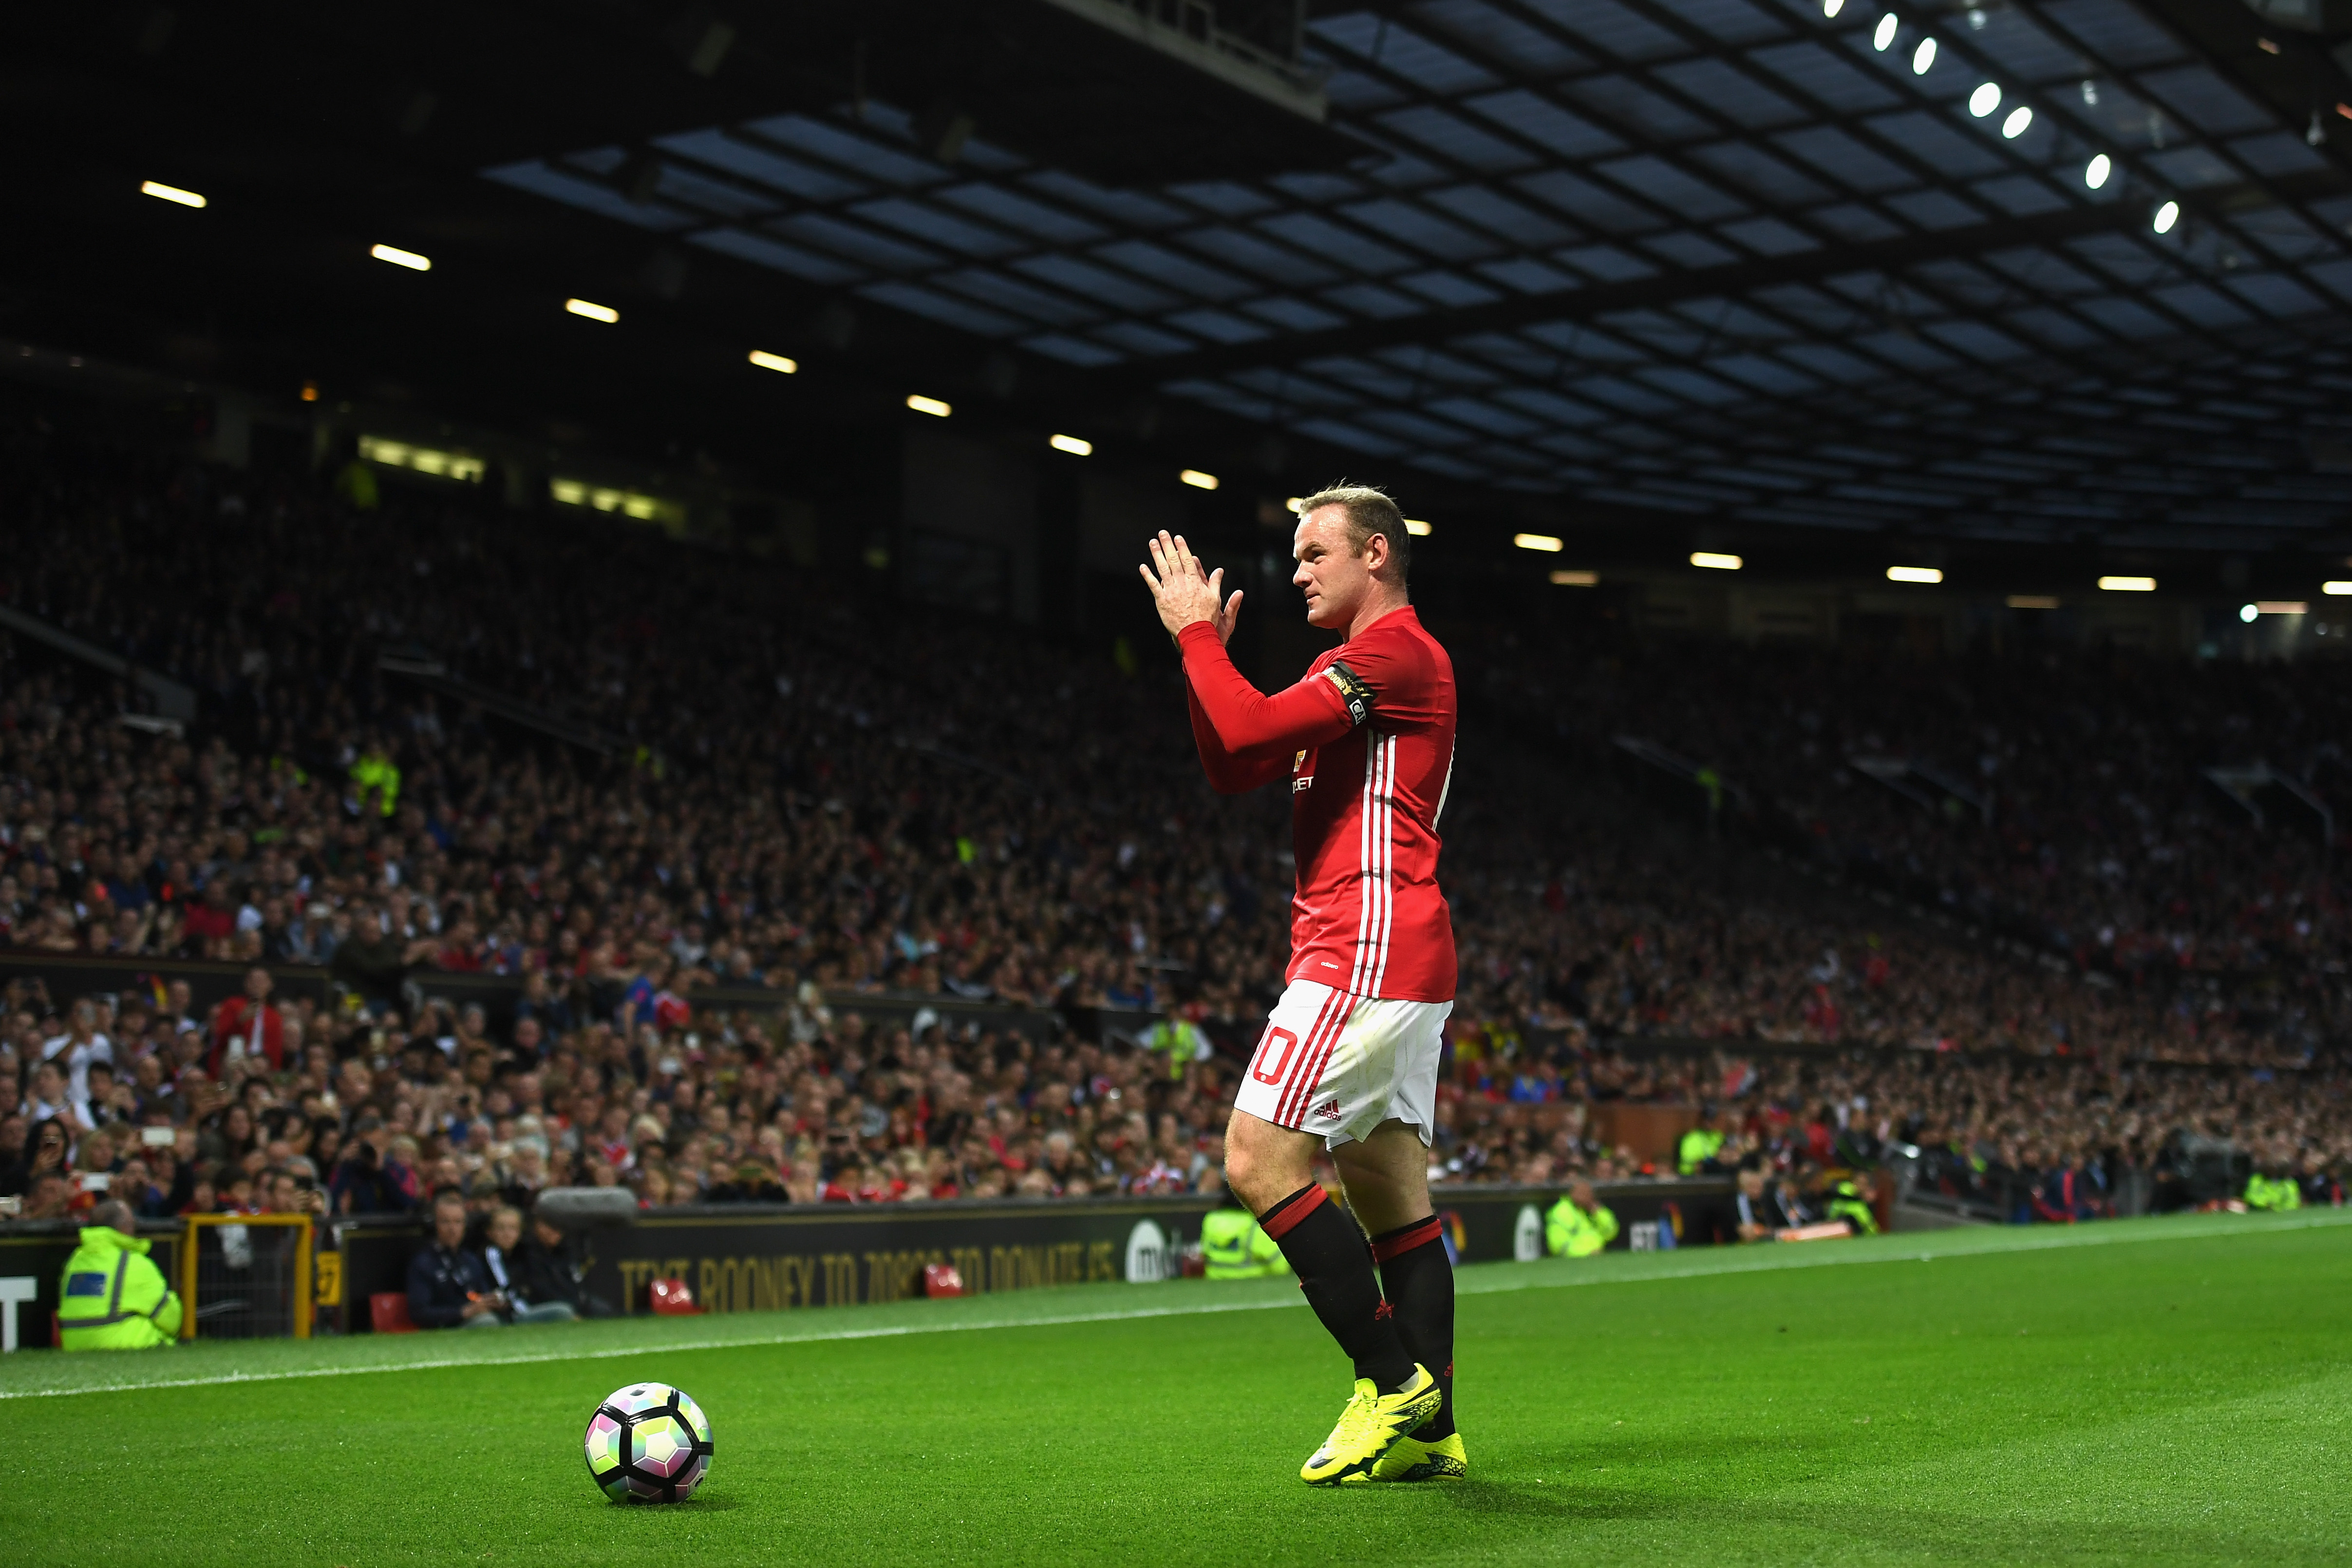 MANCHESTER, ENGLAND - AUGUST 03:  Wayne Rooney of Manchester United applauds supporters during the Wayne Rooney Testimonial match between Manchester United and Everton at Old Trafford on August 3, 2016 in Manchester, England.  (Photo by Michael Regan/Getty Images)